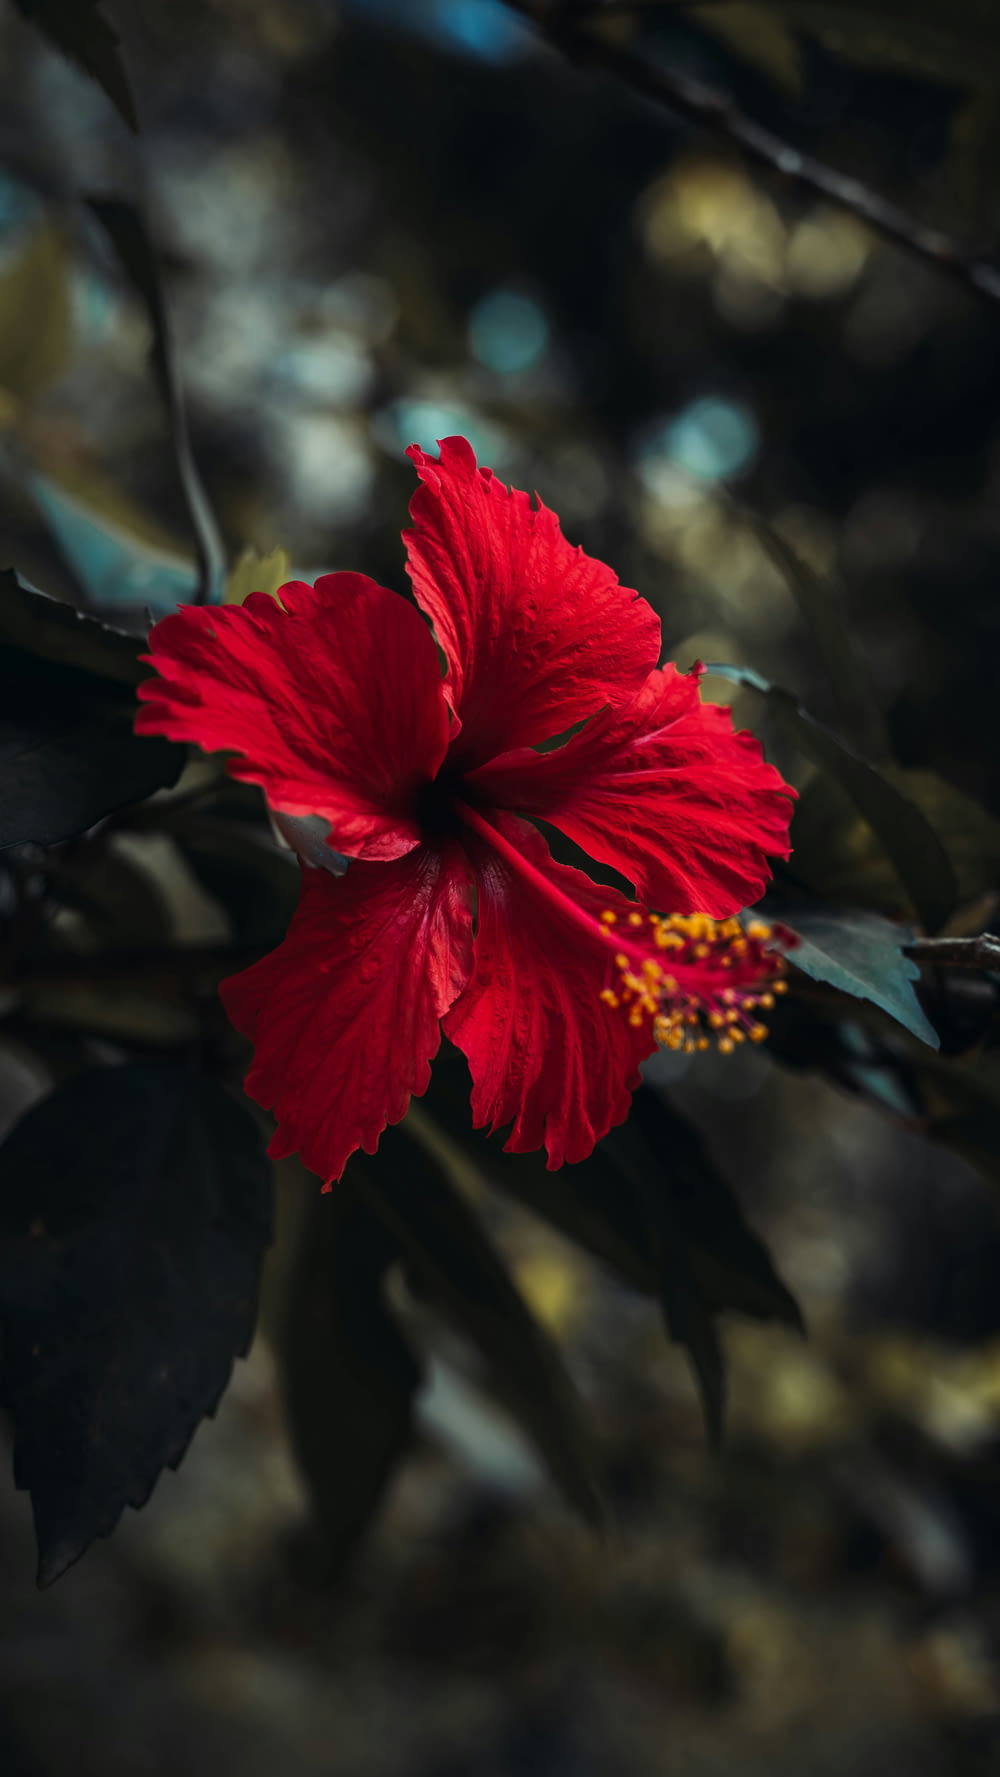 a large red flower on a tree branch